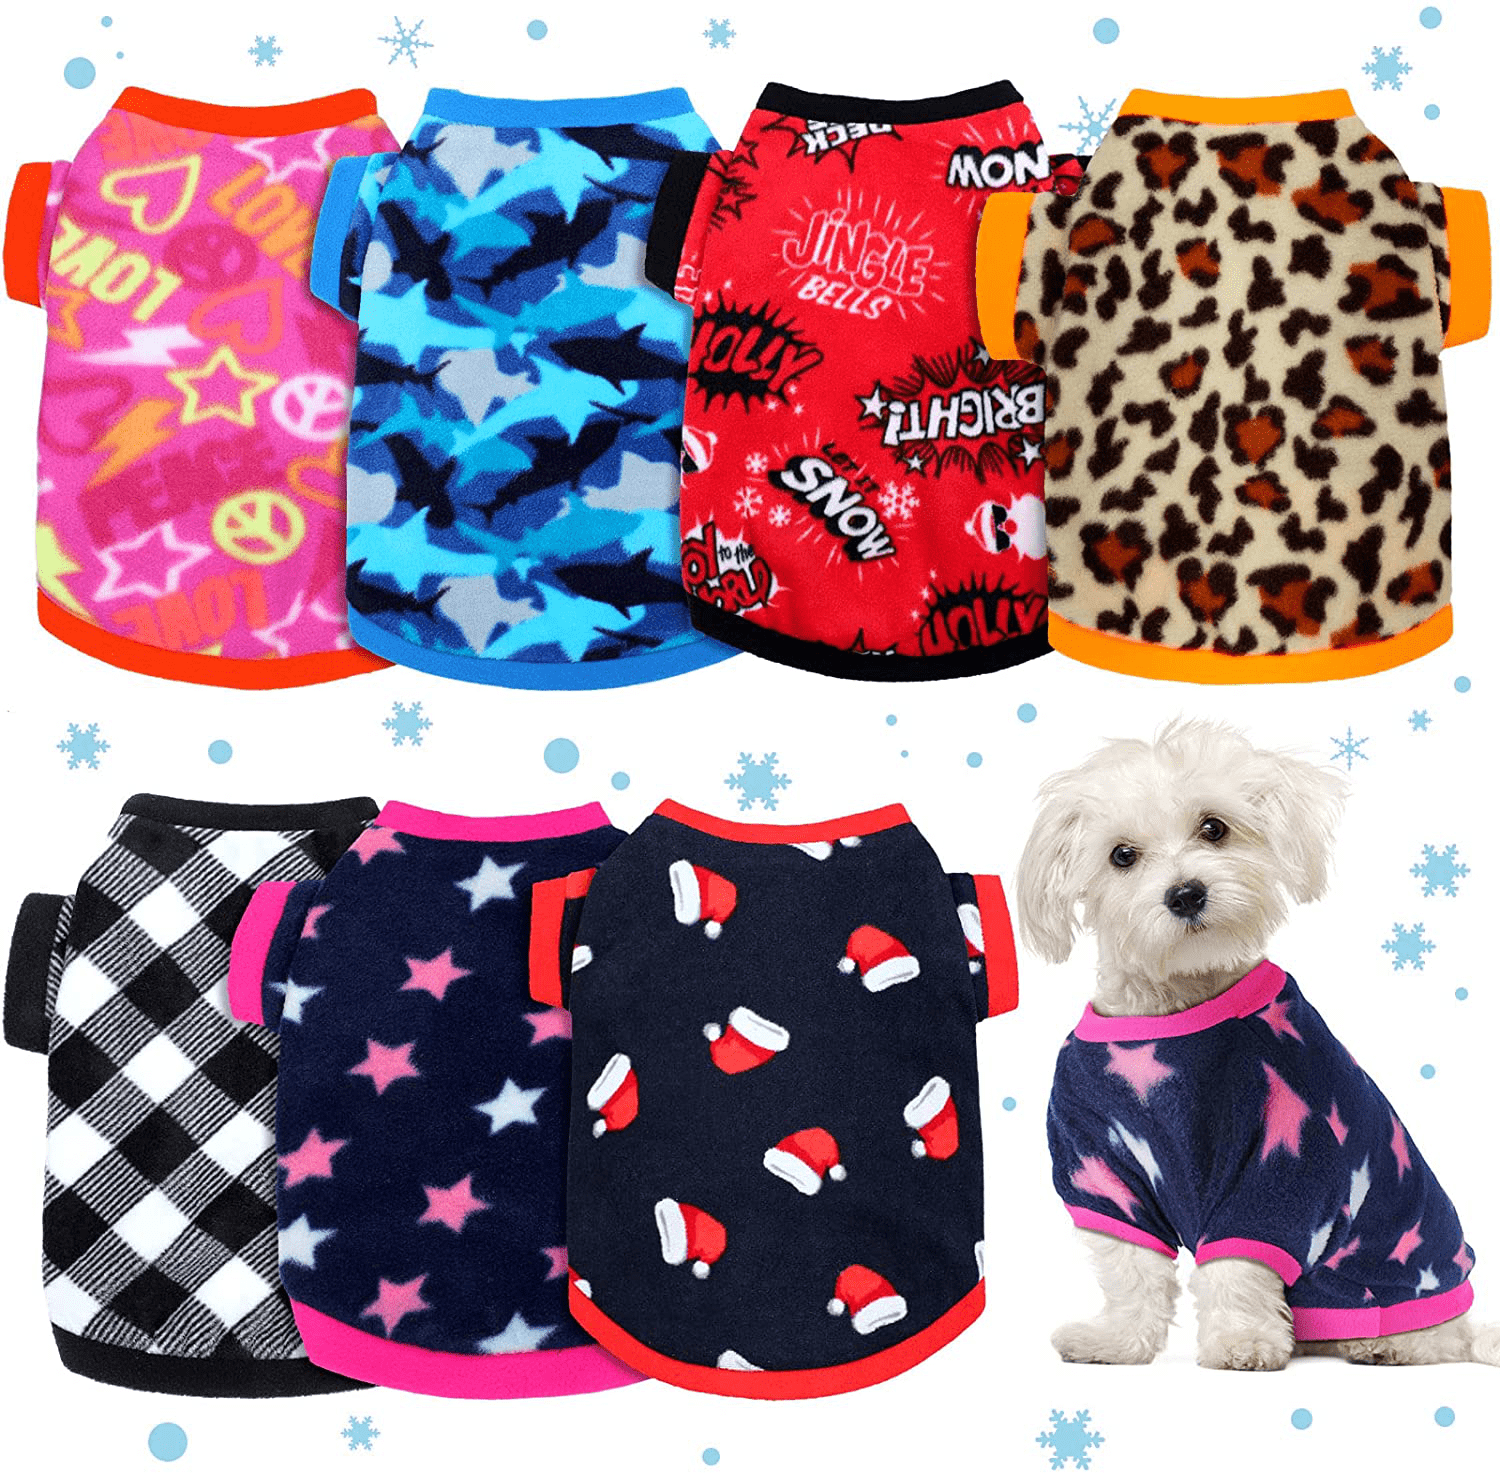 7 Pieces Dog Fleece Sweaters Dog Warm Sweater Dog Sweatshirt Winter Dog Outfits Soft Fleece Puppy Sweater Dog Outfits for Chihuahua Yorkshire Poodle Pets Pup Dog Cat Animals & Pet Supplies > Pet Supplies > Dog Supplies > Dog Apparel Xuniea Classic Pattern Small 